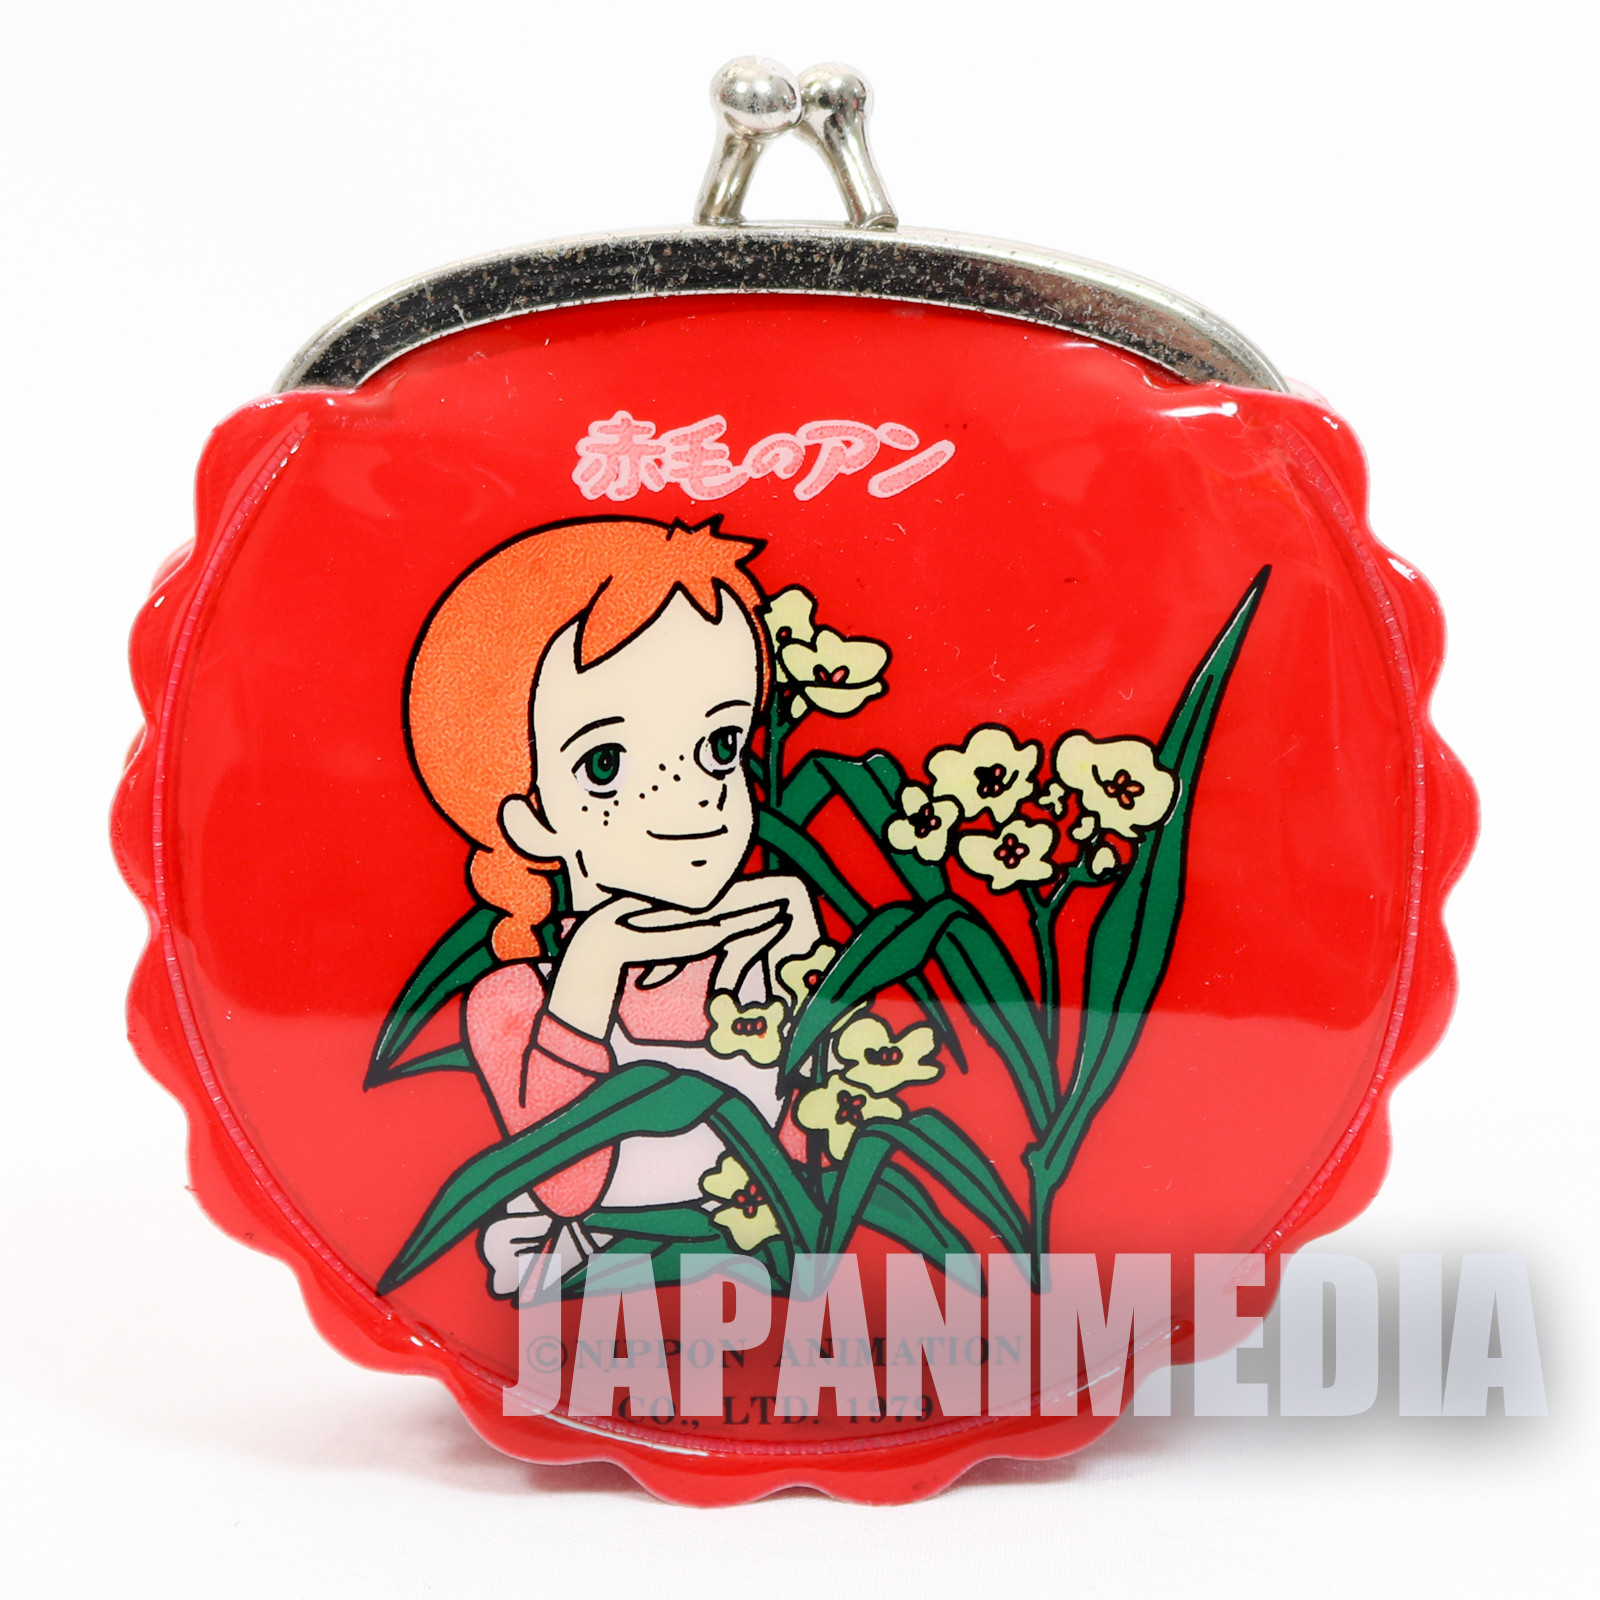 Retro! Anne of Green Gables Purse with a Clasp Coin Case Red #1 JAPAN ANIME